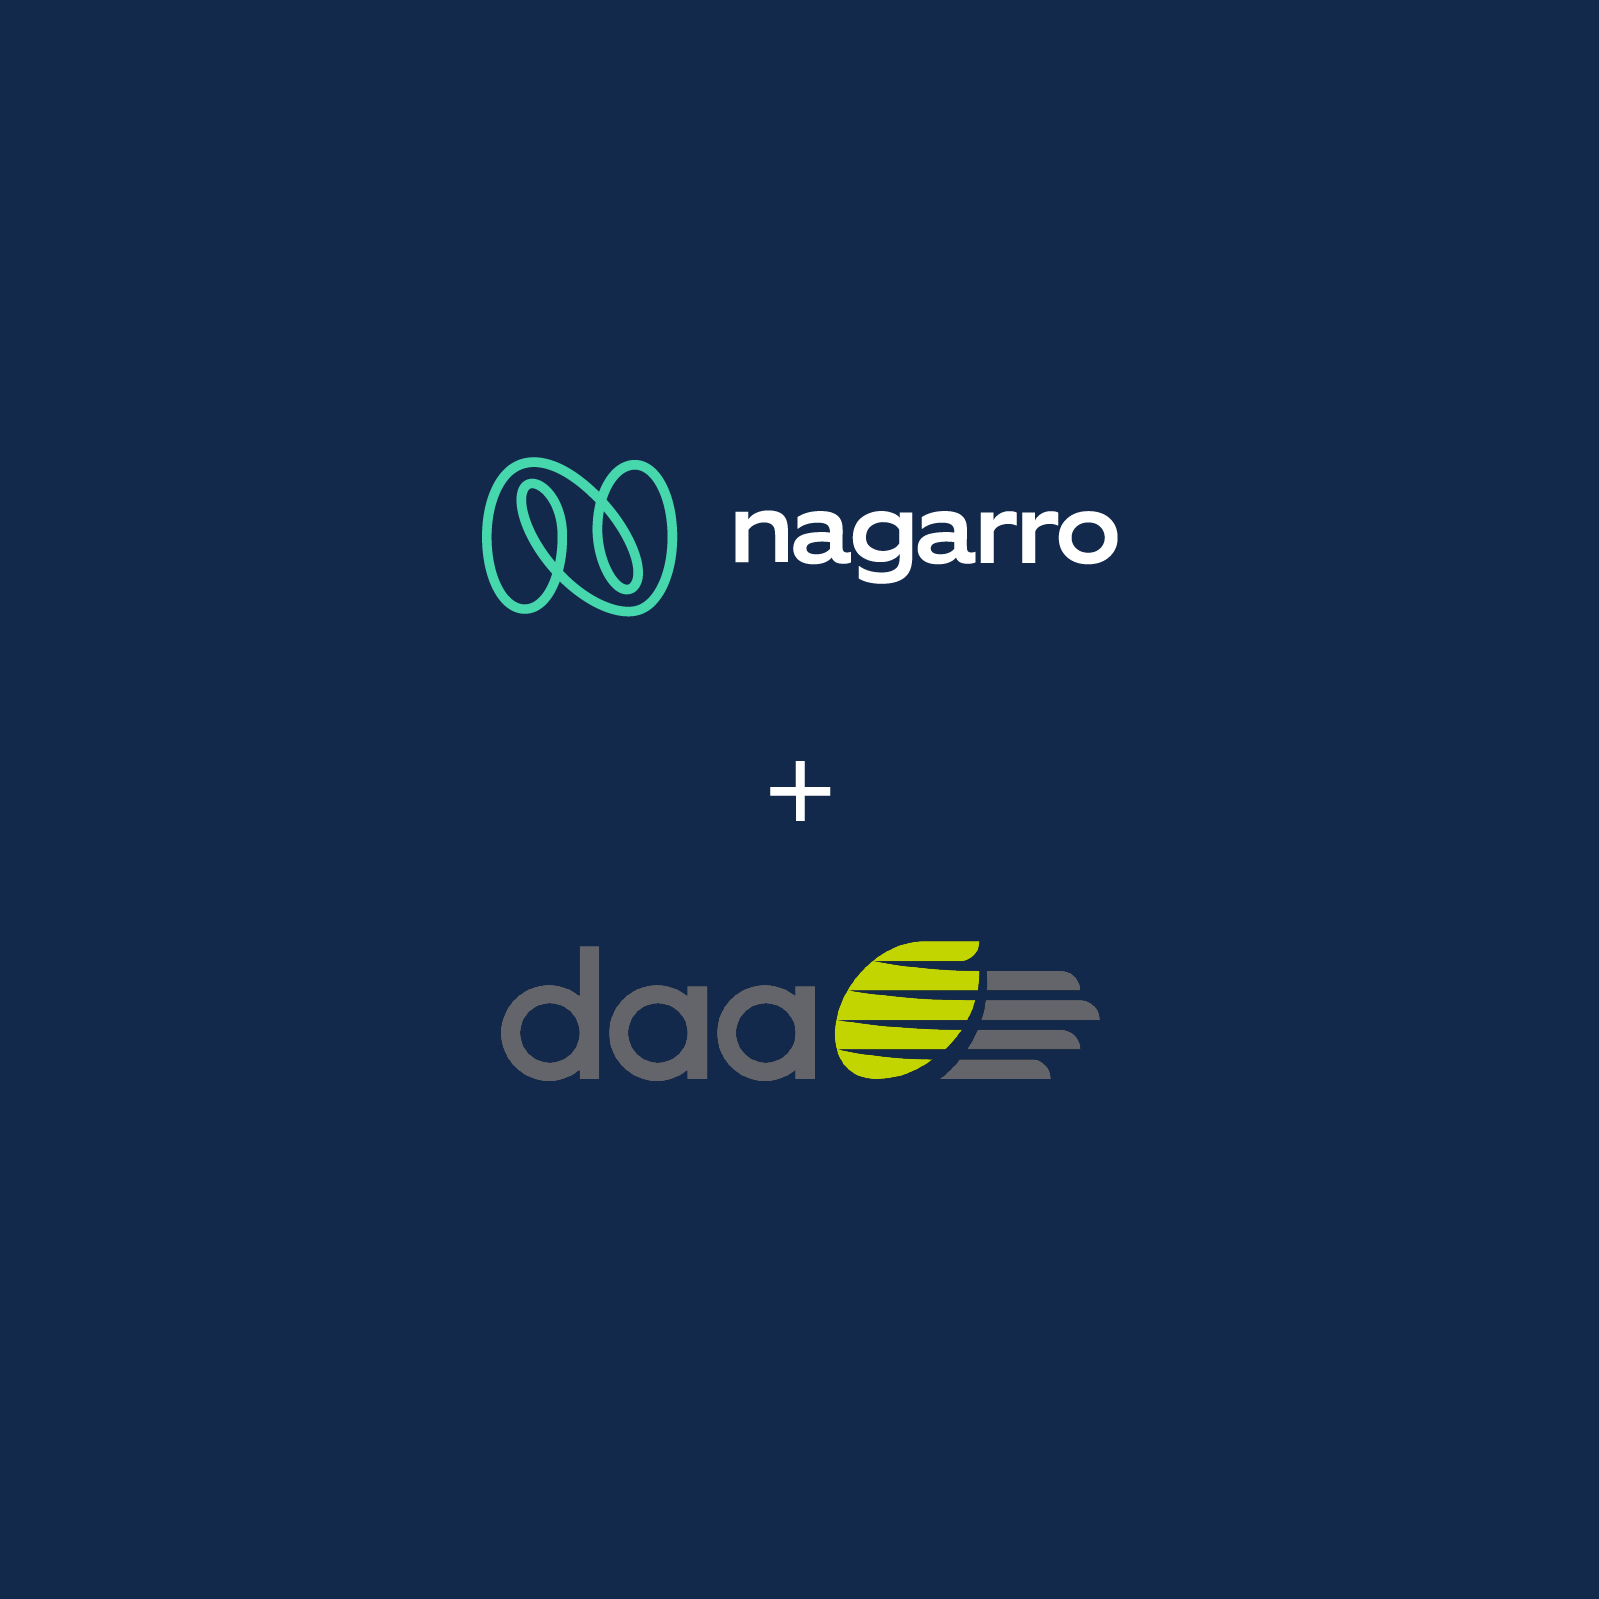 Nagarro links up with daa to enable a data-driven culture